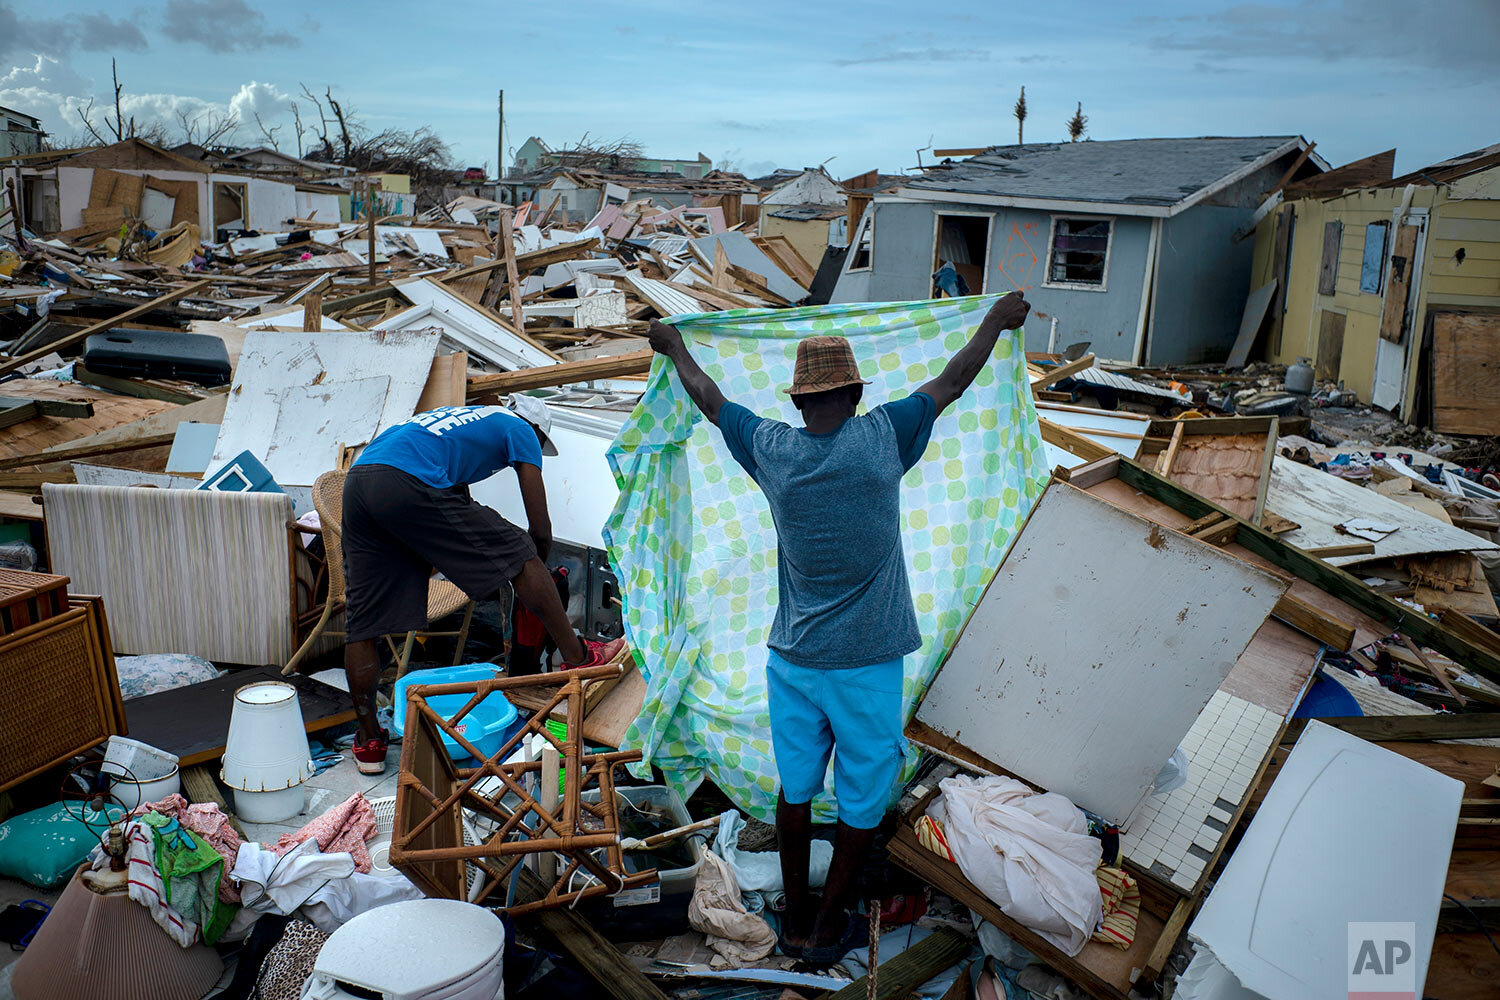  Immigrants from Haiti recover their belongings from the rubble in their destroyed homes, in the aftermath of Hurricane Dorian in Abaco, Bahamas, Monday, Sept. 16, 2019.  (AP Photo/Ramon Espinosa) 